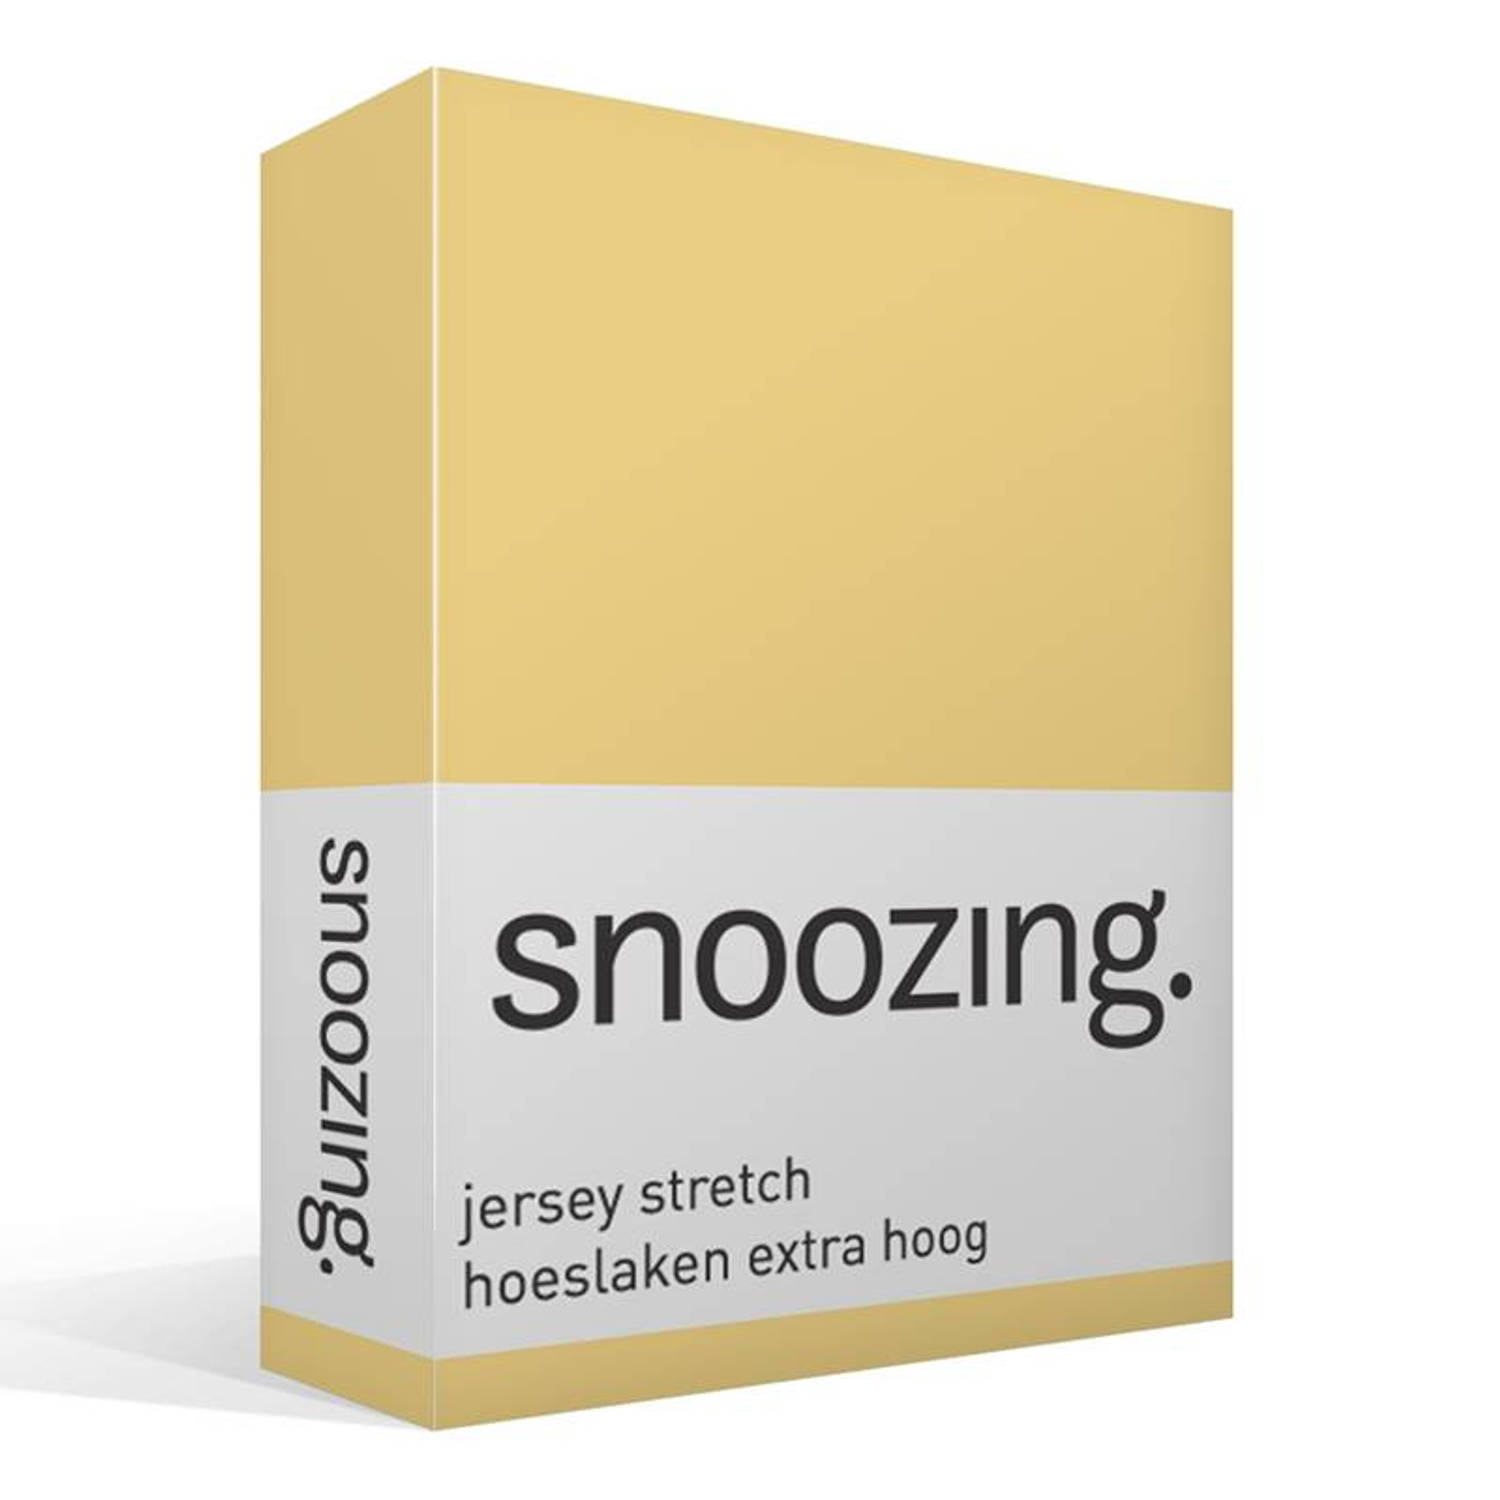 Snoozing jersey stretch hoeslaken extra hoog - 1-persoons (90/100x200/220 cm)